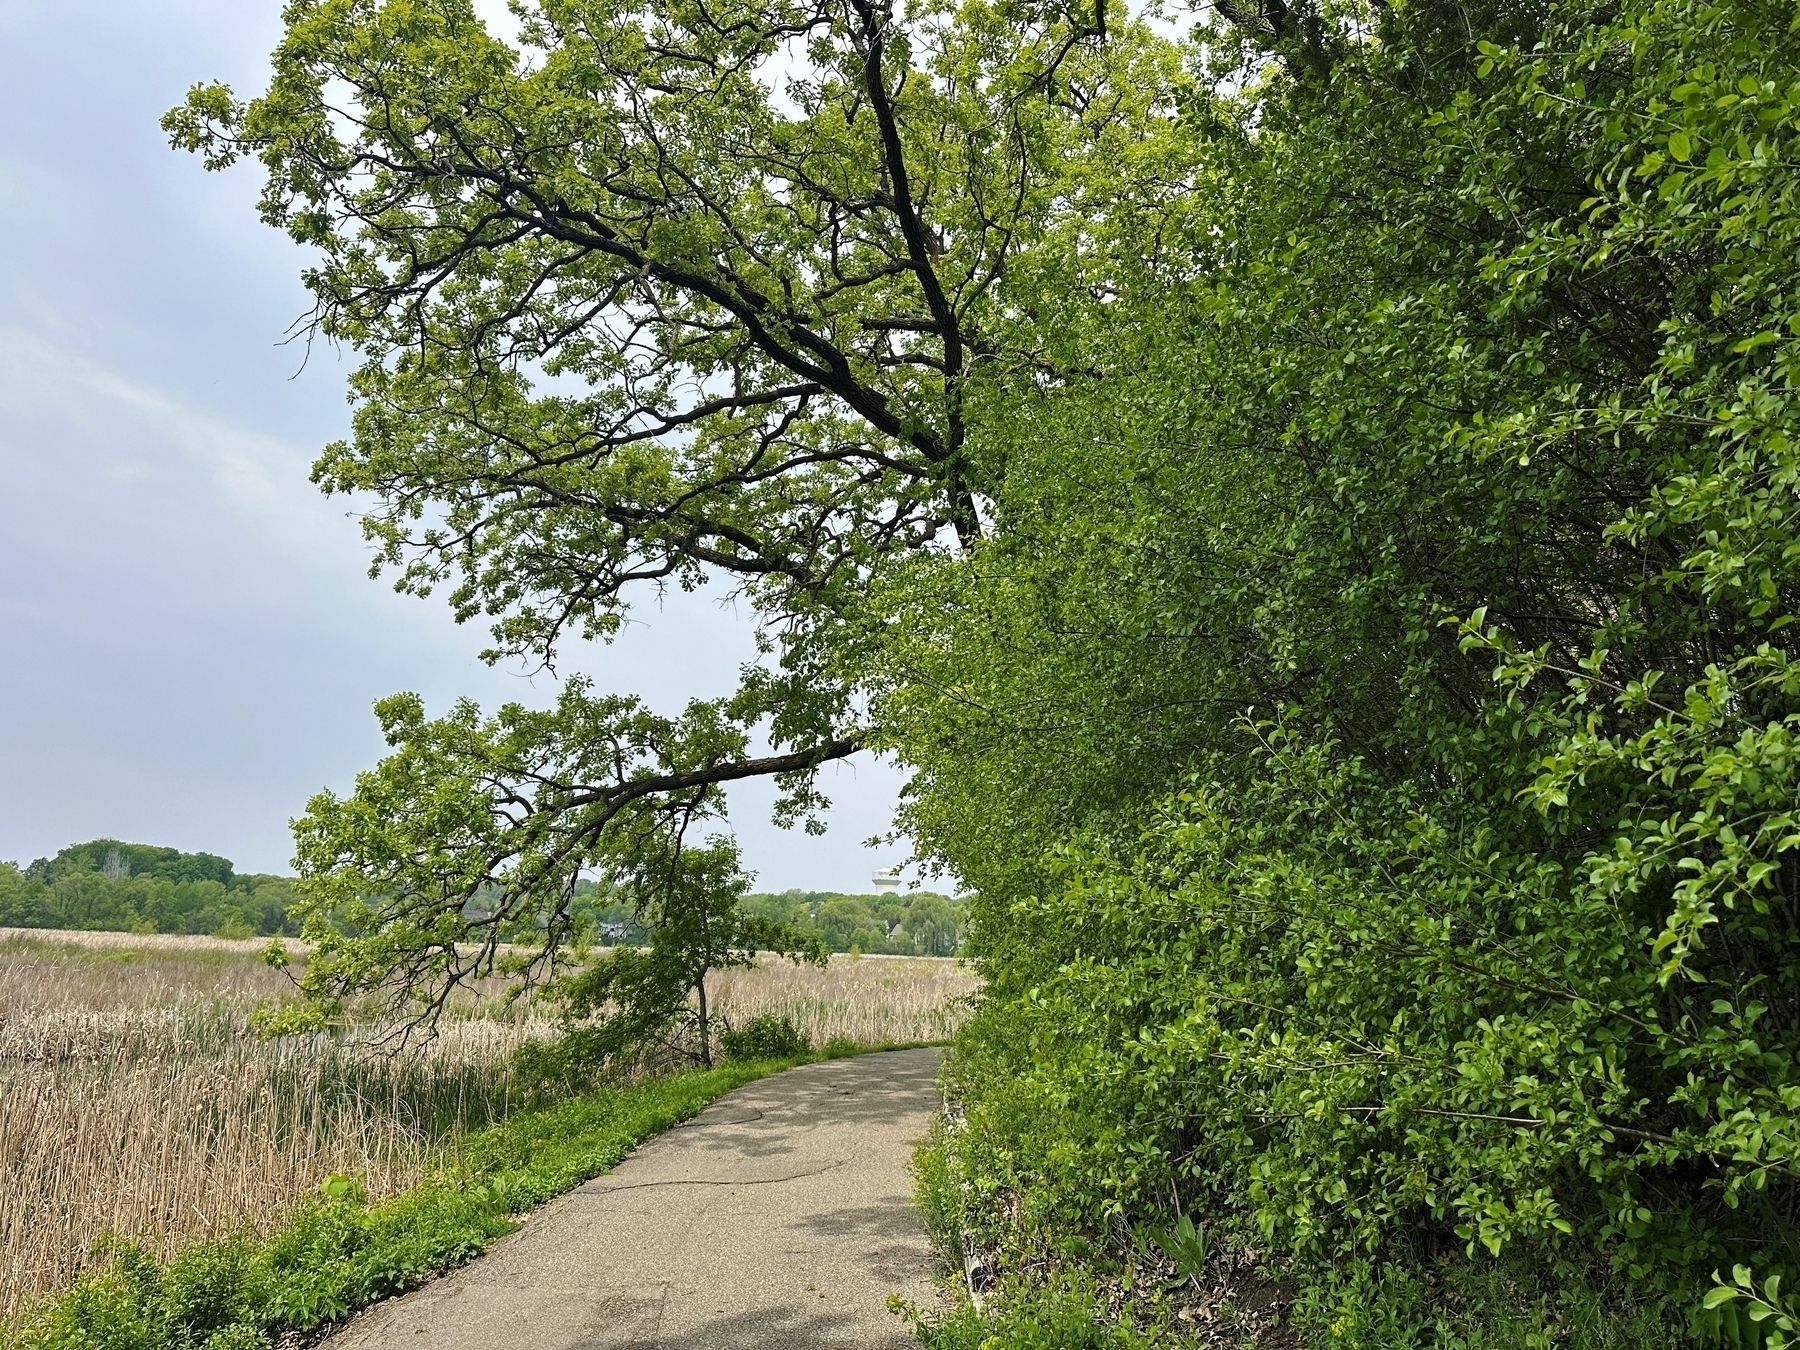 A large tree with spreading branches hangs over a paved path, surrounded by dense green foliage on one side and a marshy field on the other under a cloudy sky.